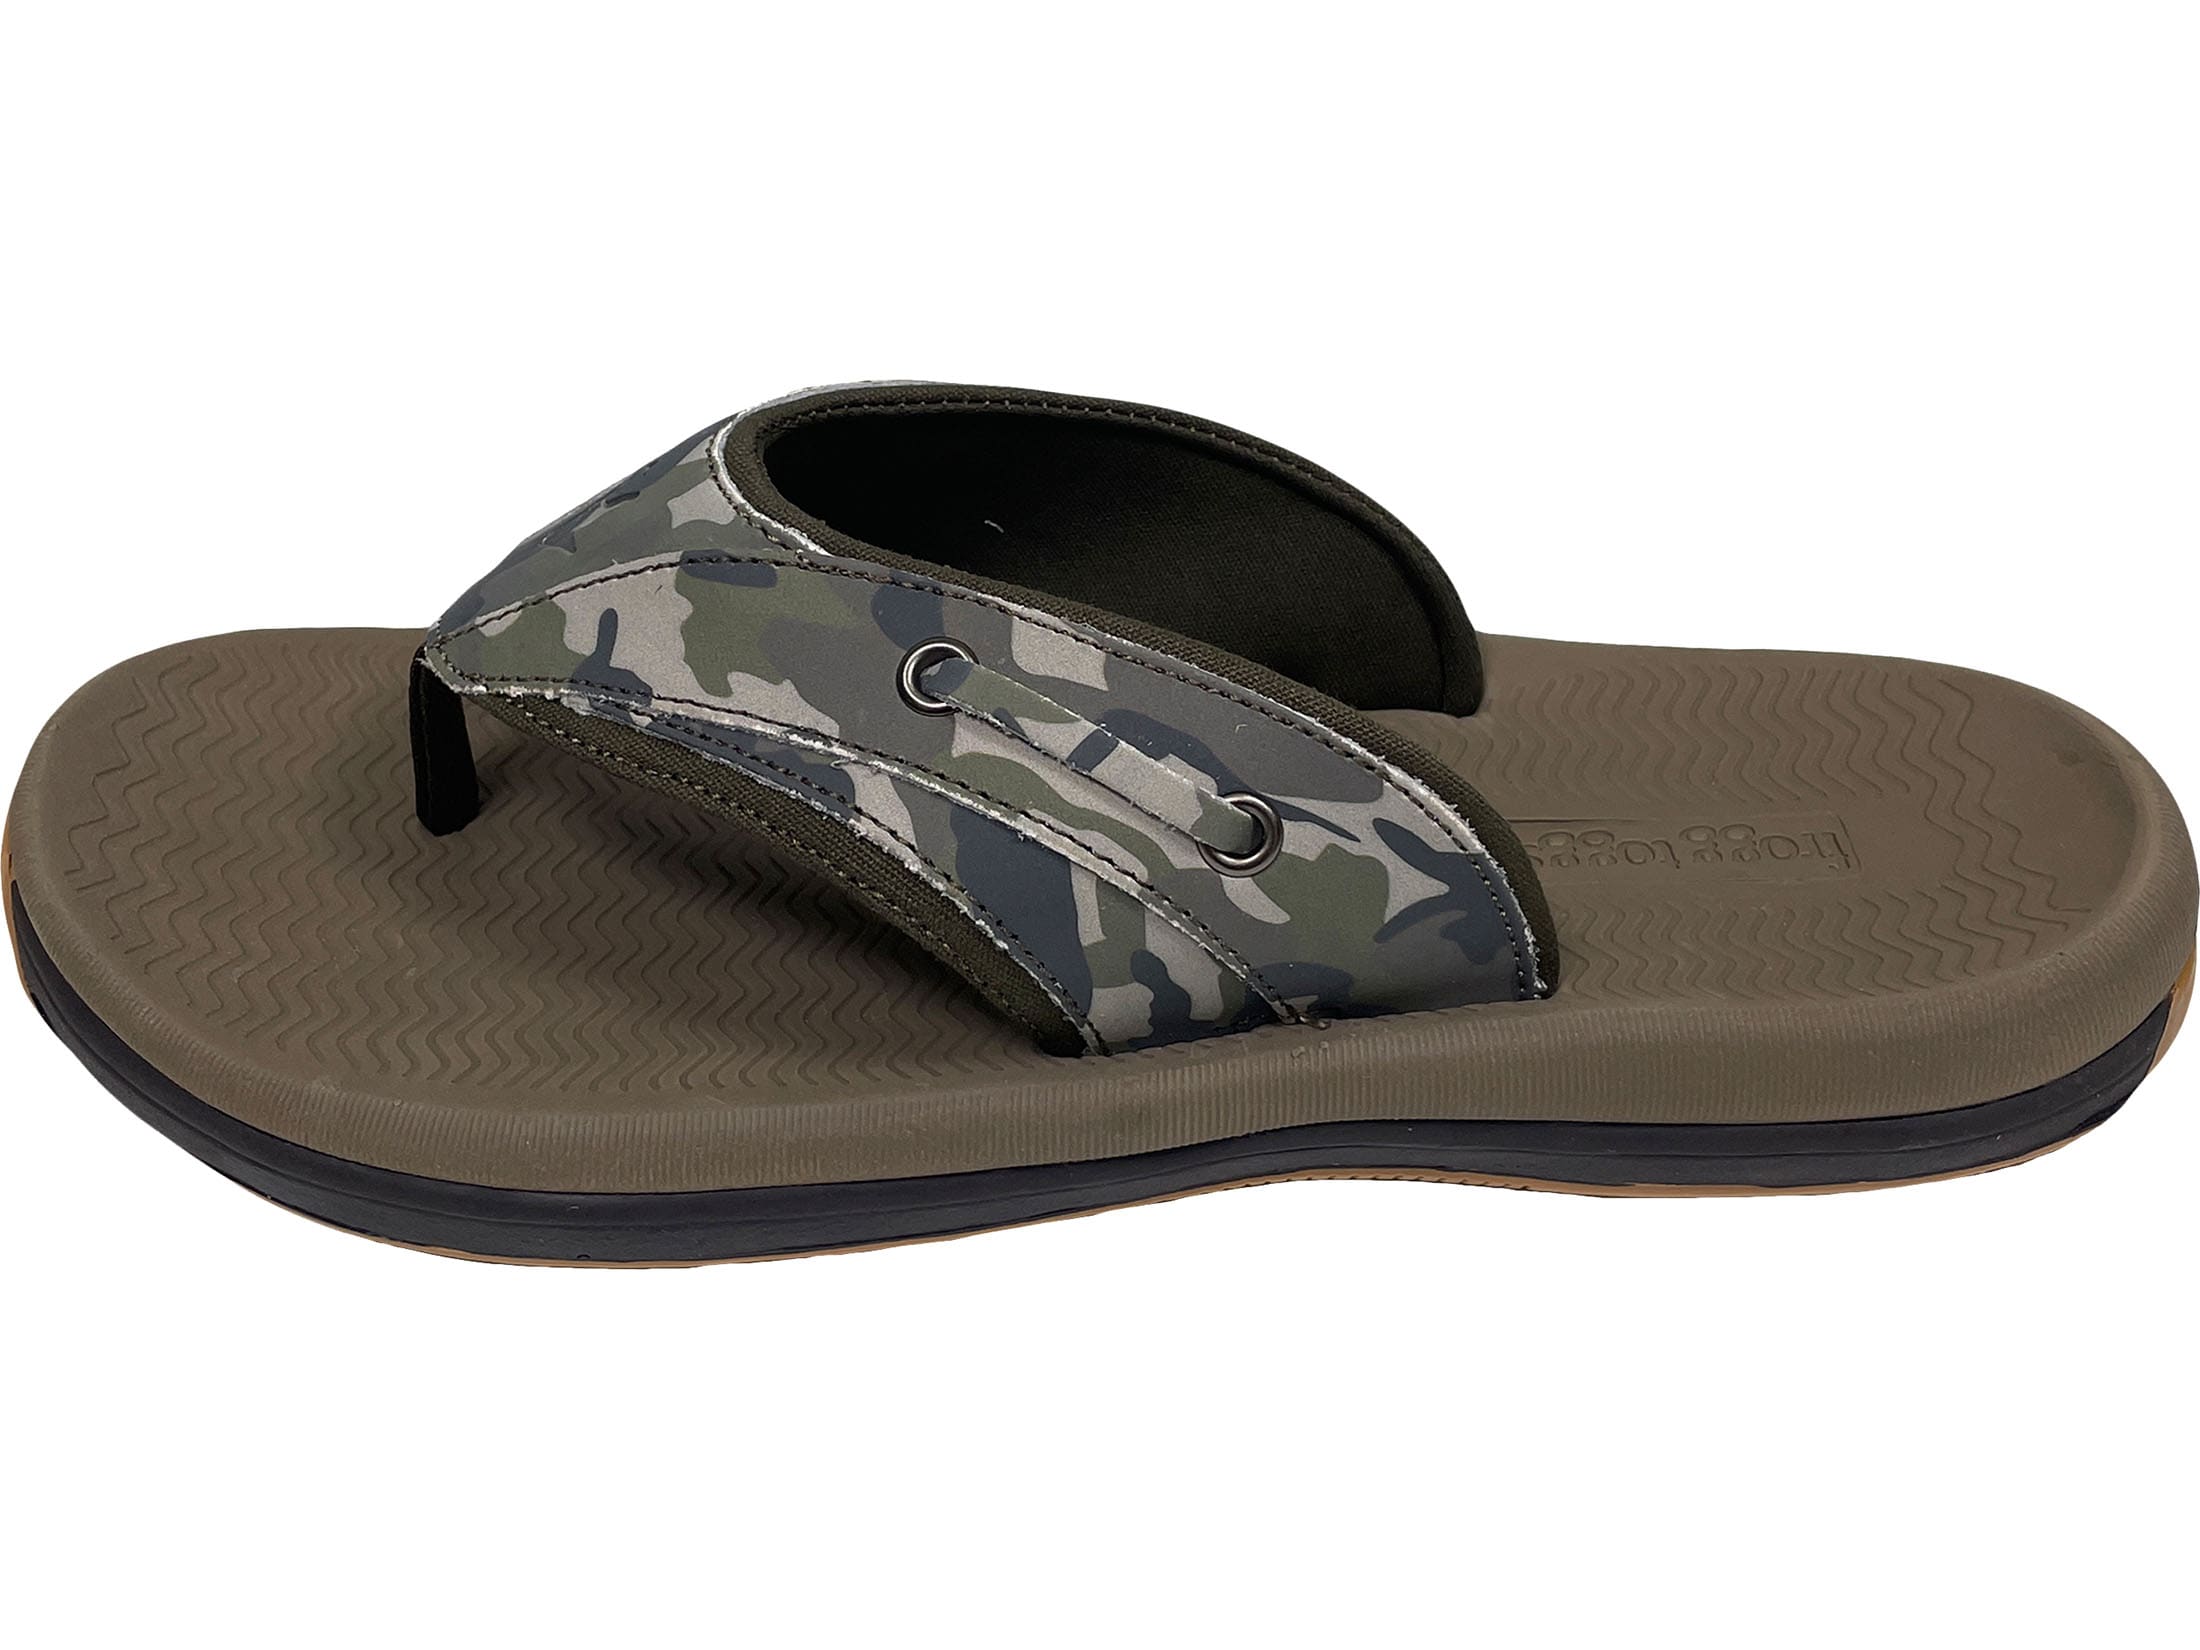 Frogg Toggs Boardwalk Sandals Rubber/ Synthetic Woodland Camo Men's 9